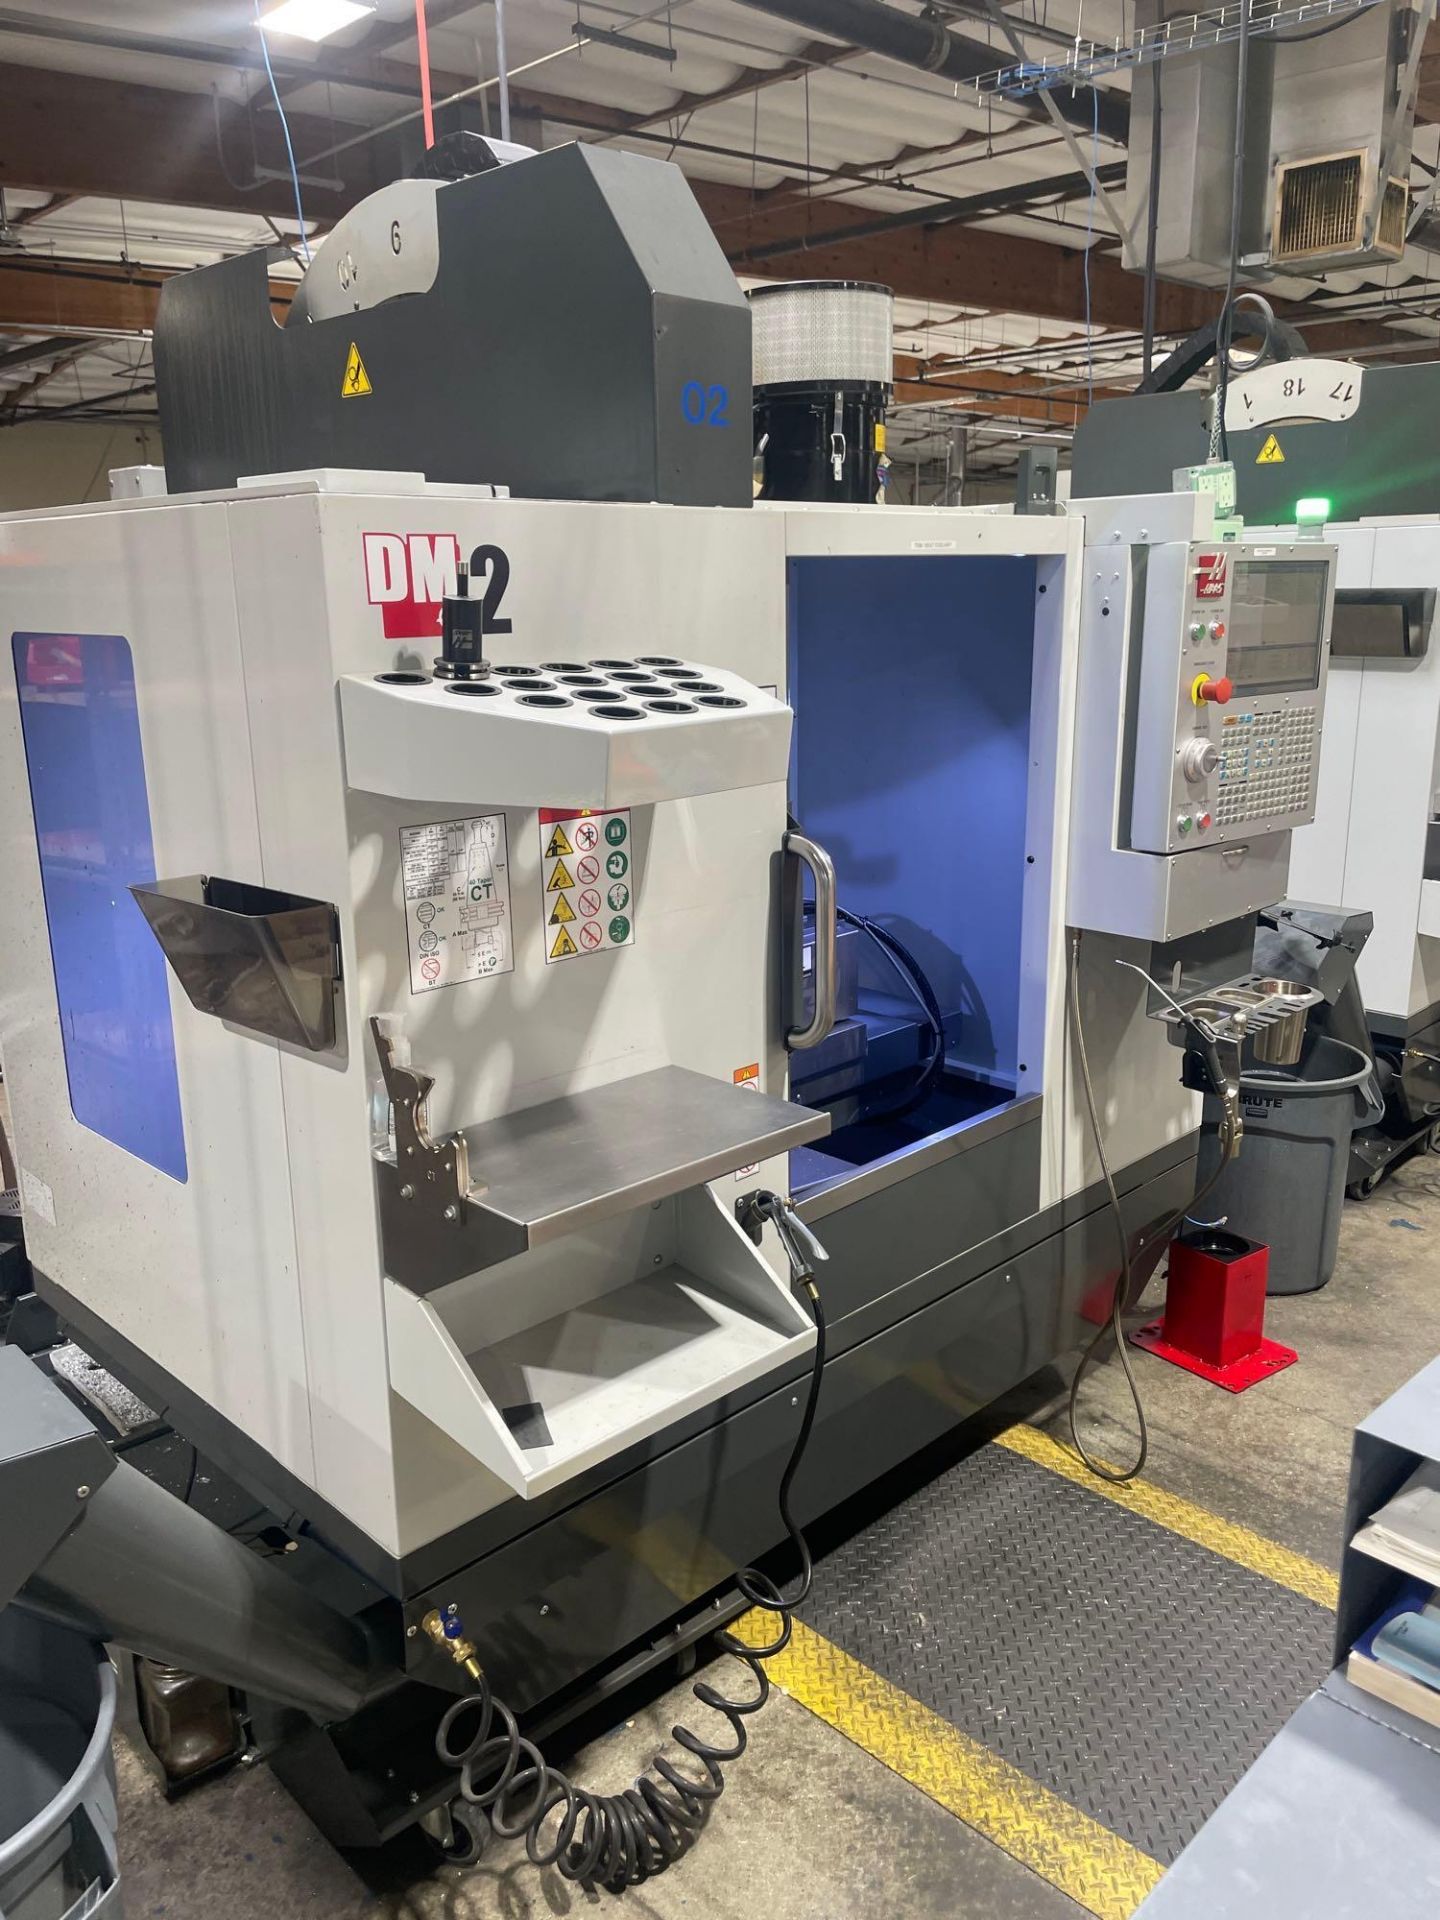 Haas DM-2, 28” x 16” 15.5” Travels, CT 40, 18+1 SMTC, 15K RPM, WIPS, New 2019 - Image 2 of 10